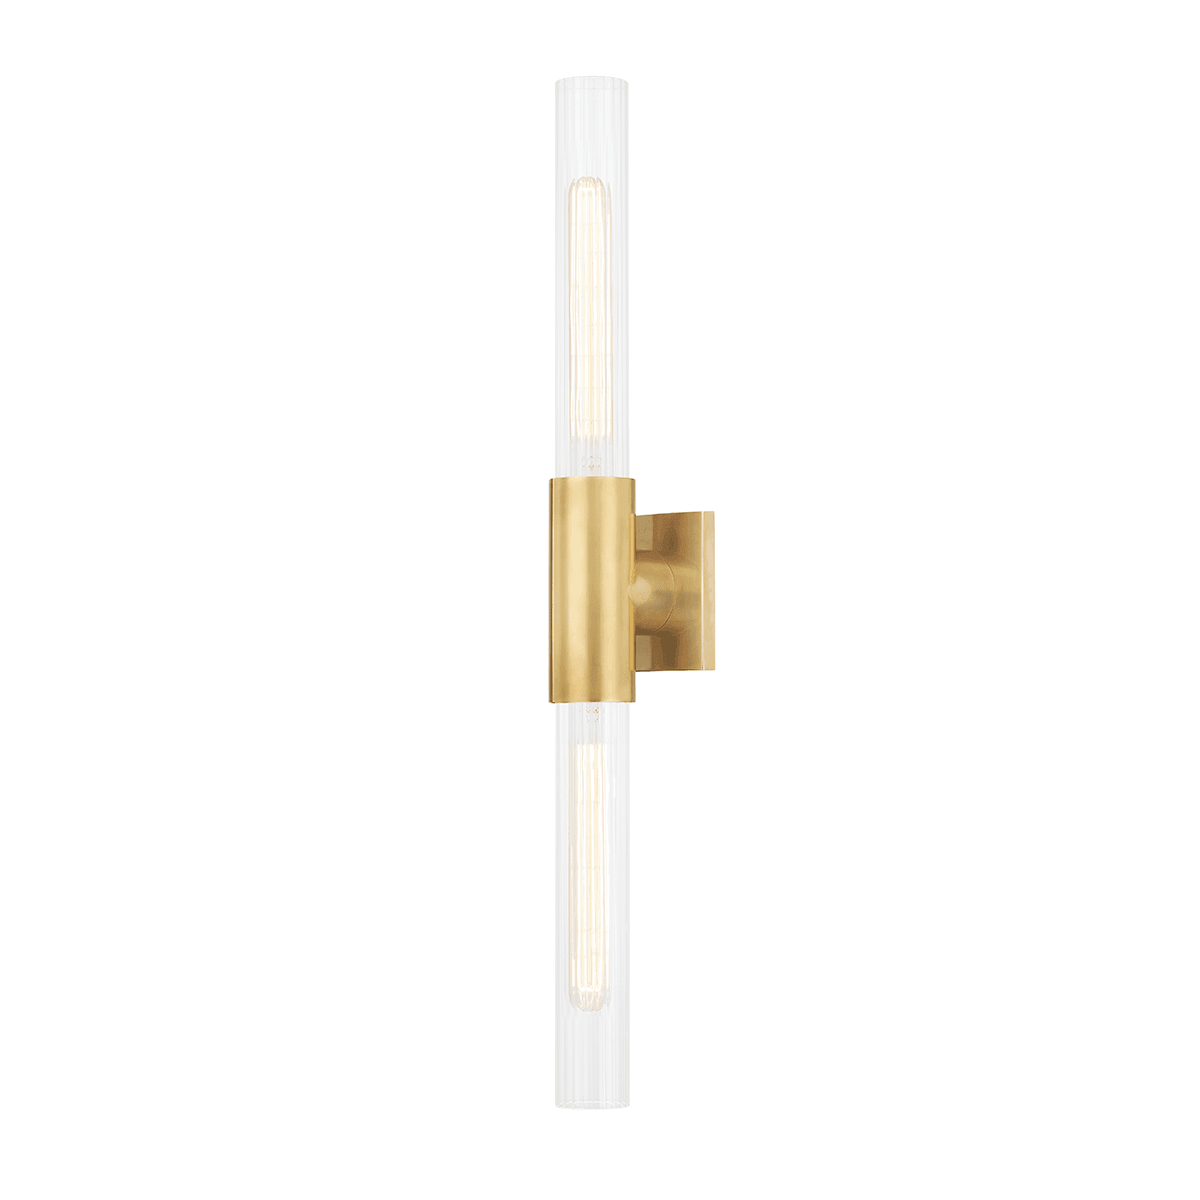 Hudson Valley Lighting - Asher Wall Sconce - 1202-AGB | Montreal Lighting & Hardware